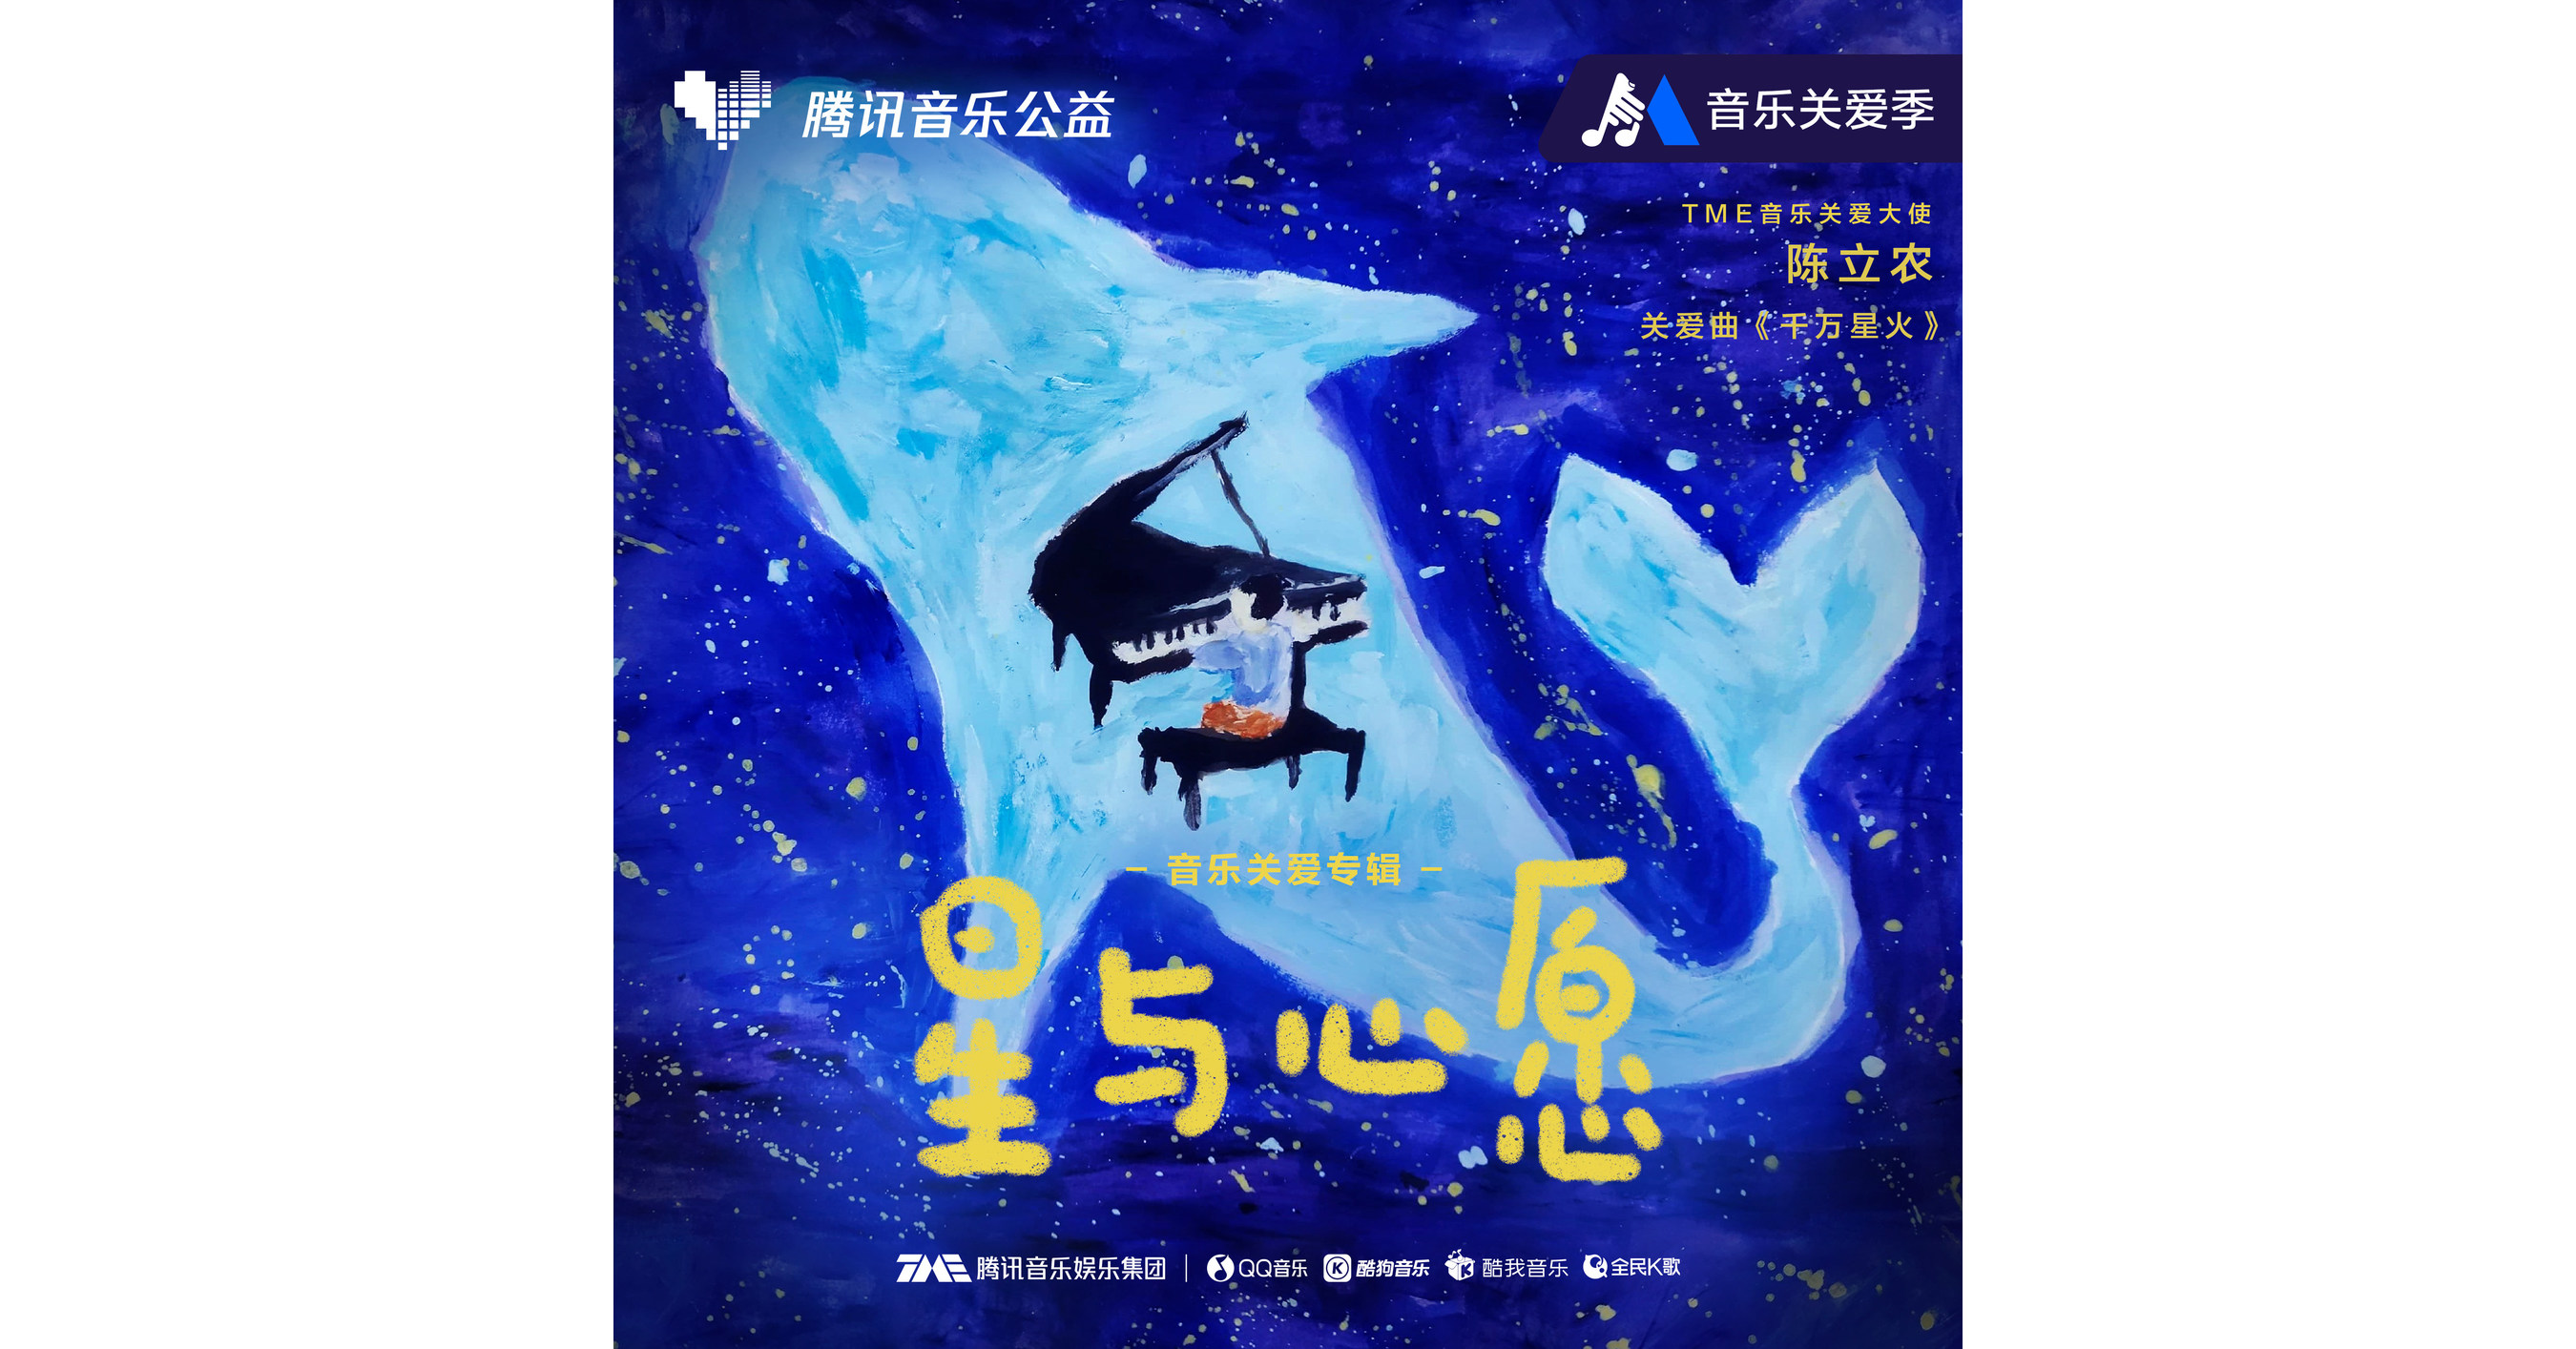 Tencent Music Entertainment Group Launches Charity Album "Stars and Wishes" on World Autism Awareness Day